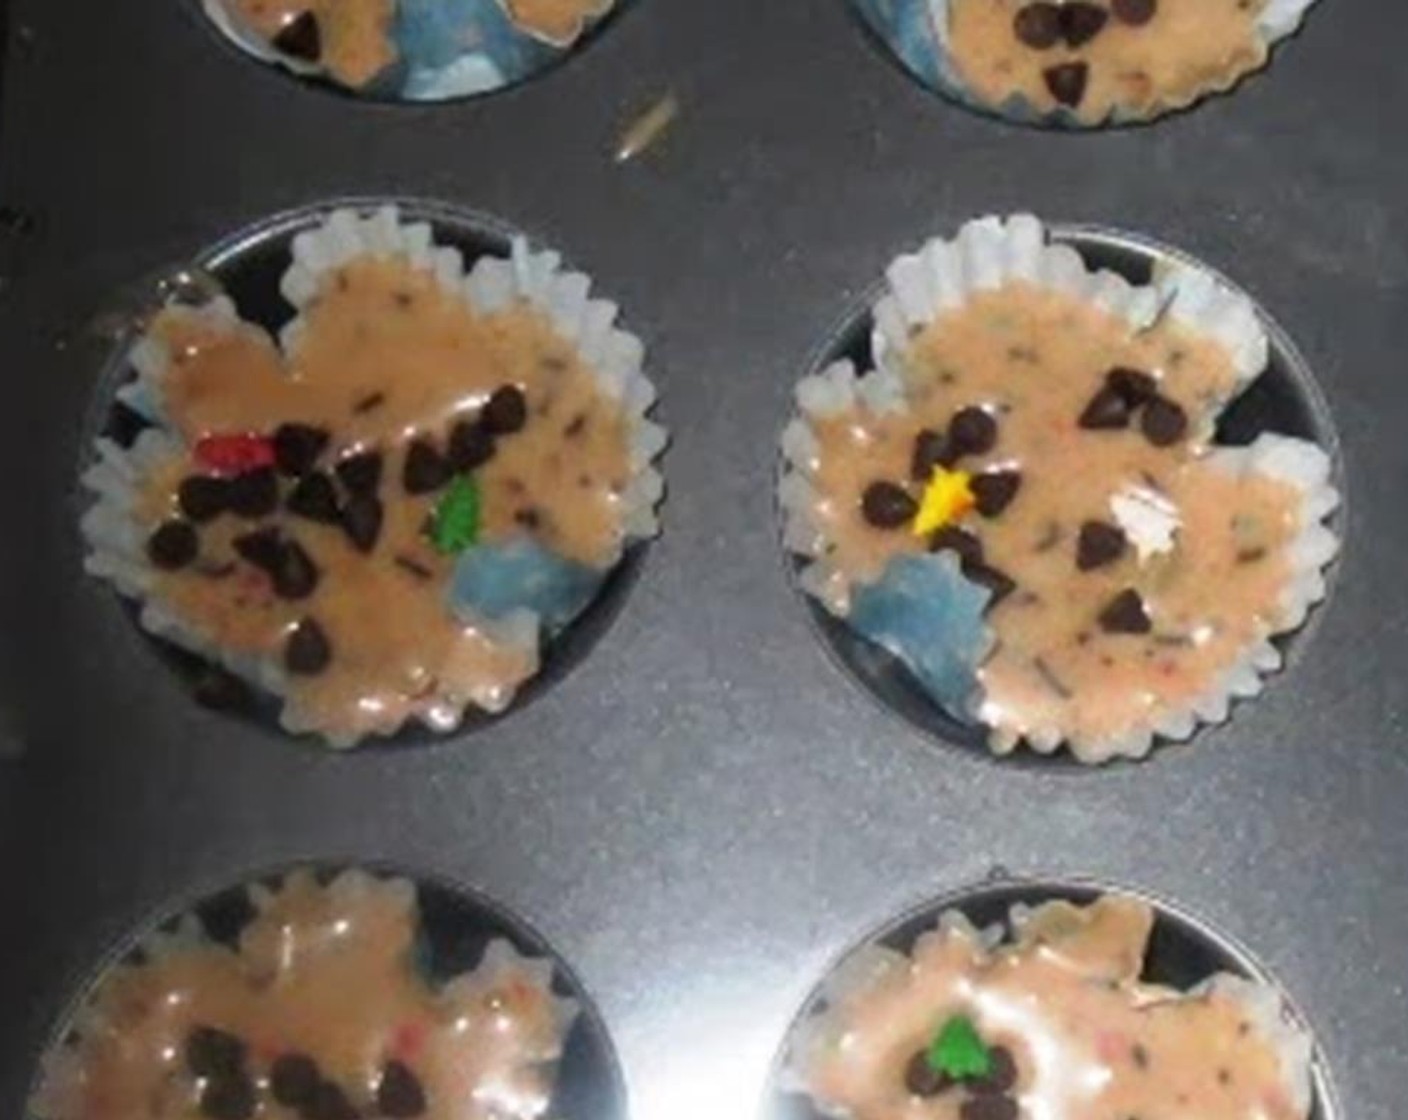 step 6 Fill 3/4 of each cupcake mold with the batter. Also sprinkle some more chocolate chips on the top of the batter.